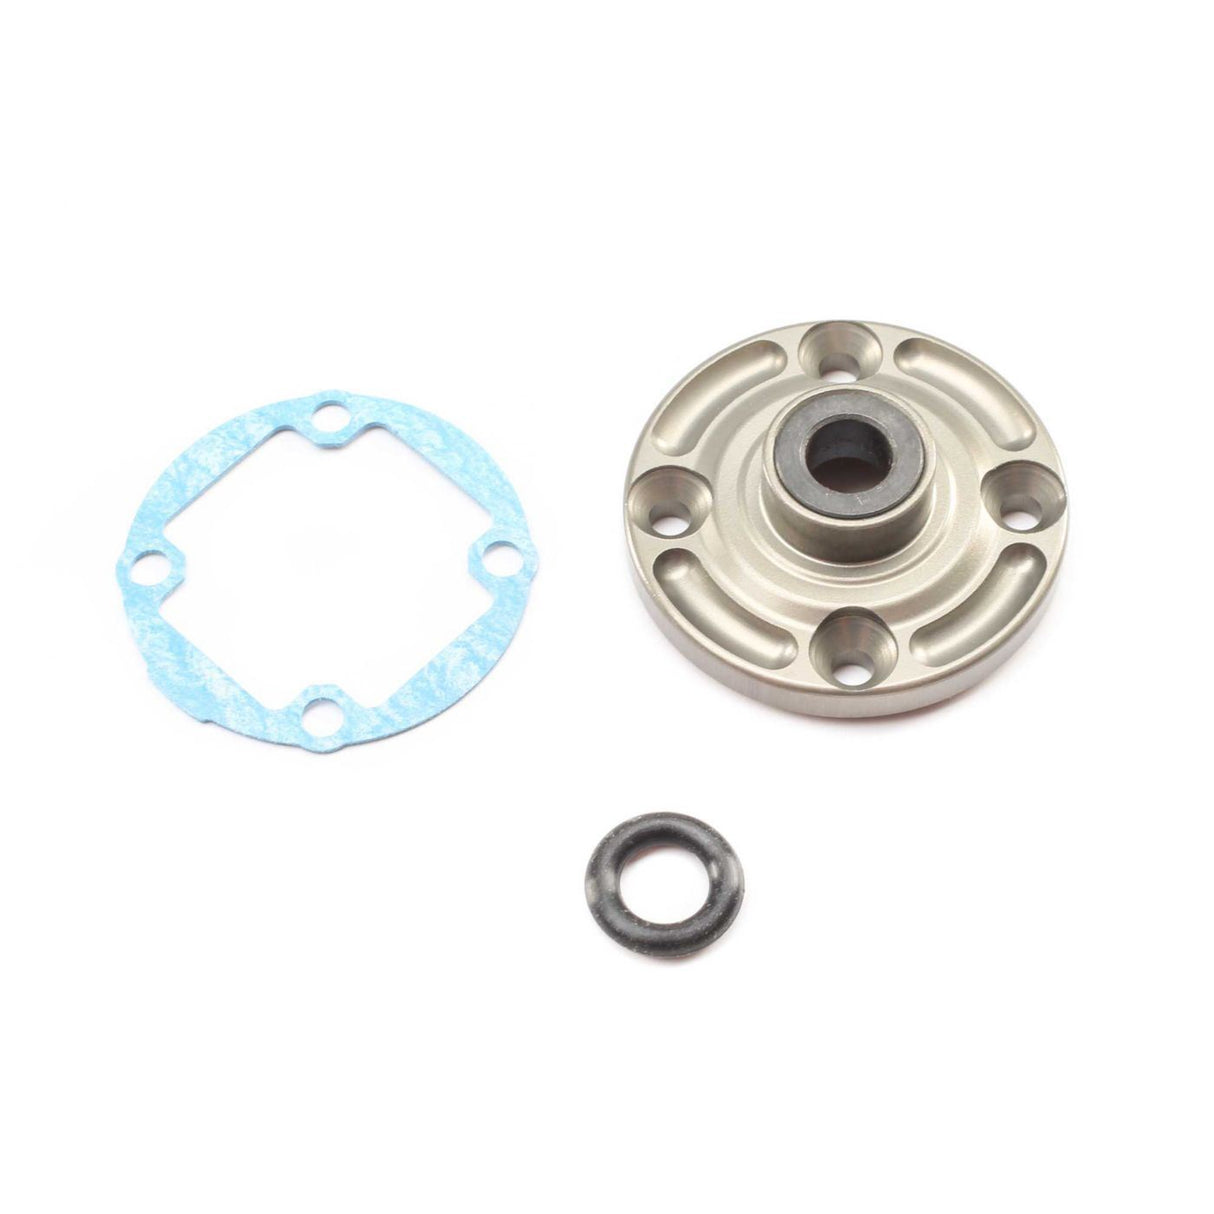 TLR Aluminum Diff Cover, G2 Gear Diff: 22